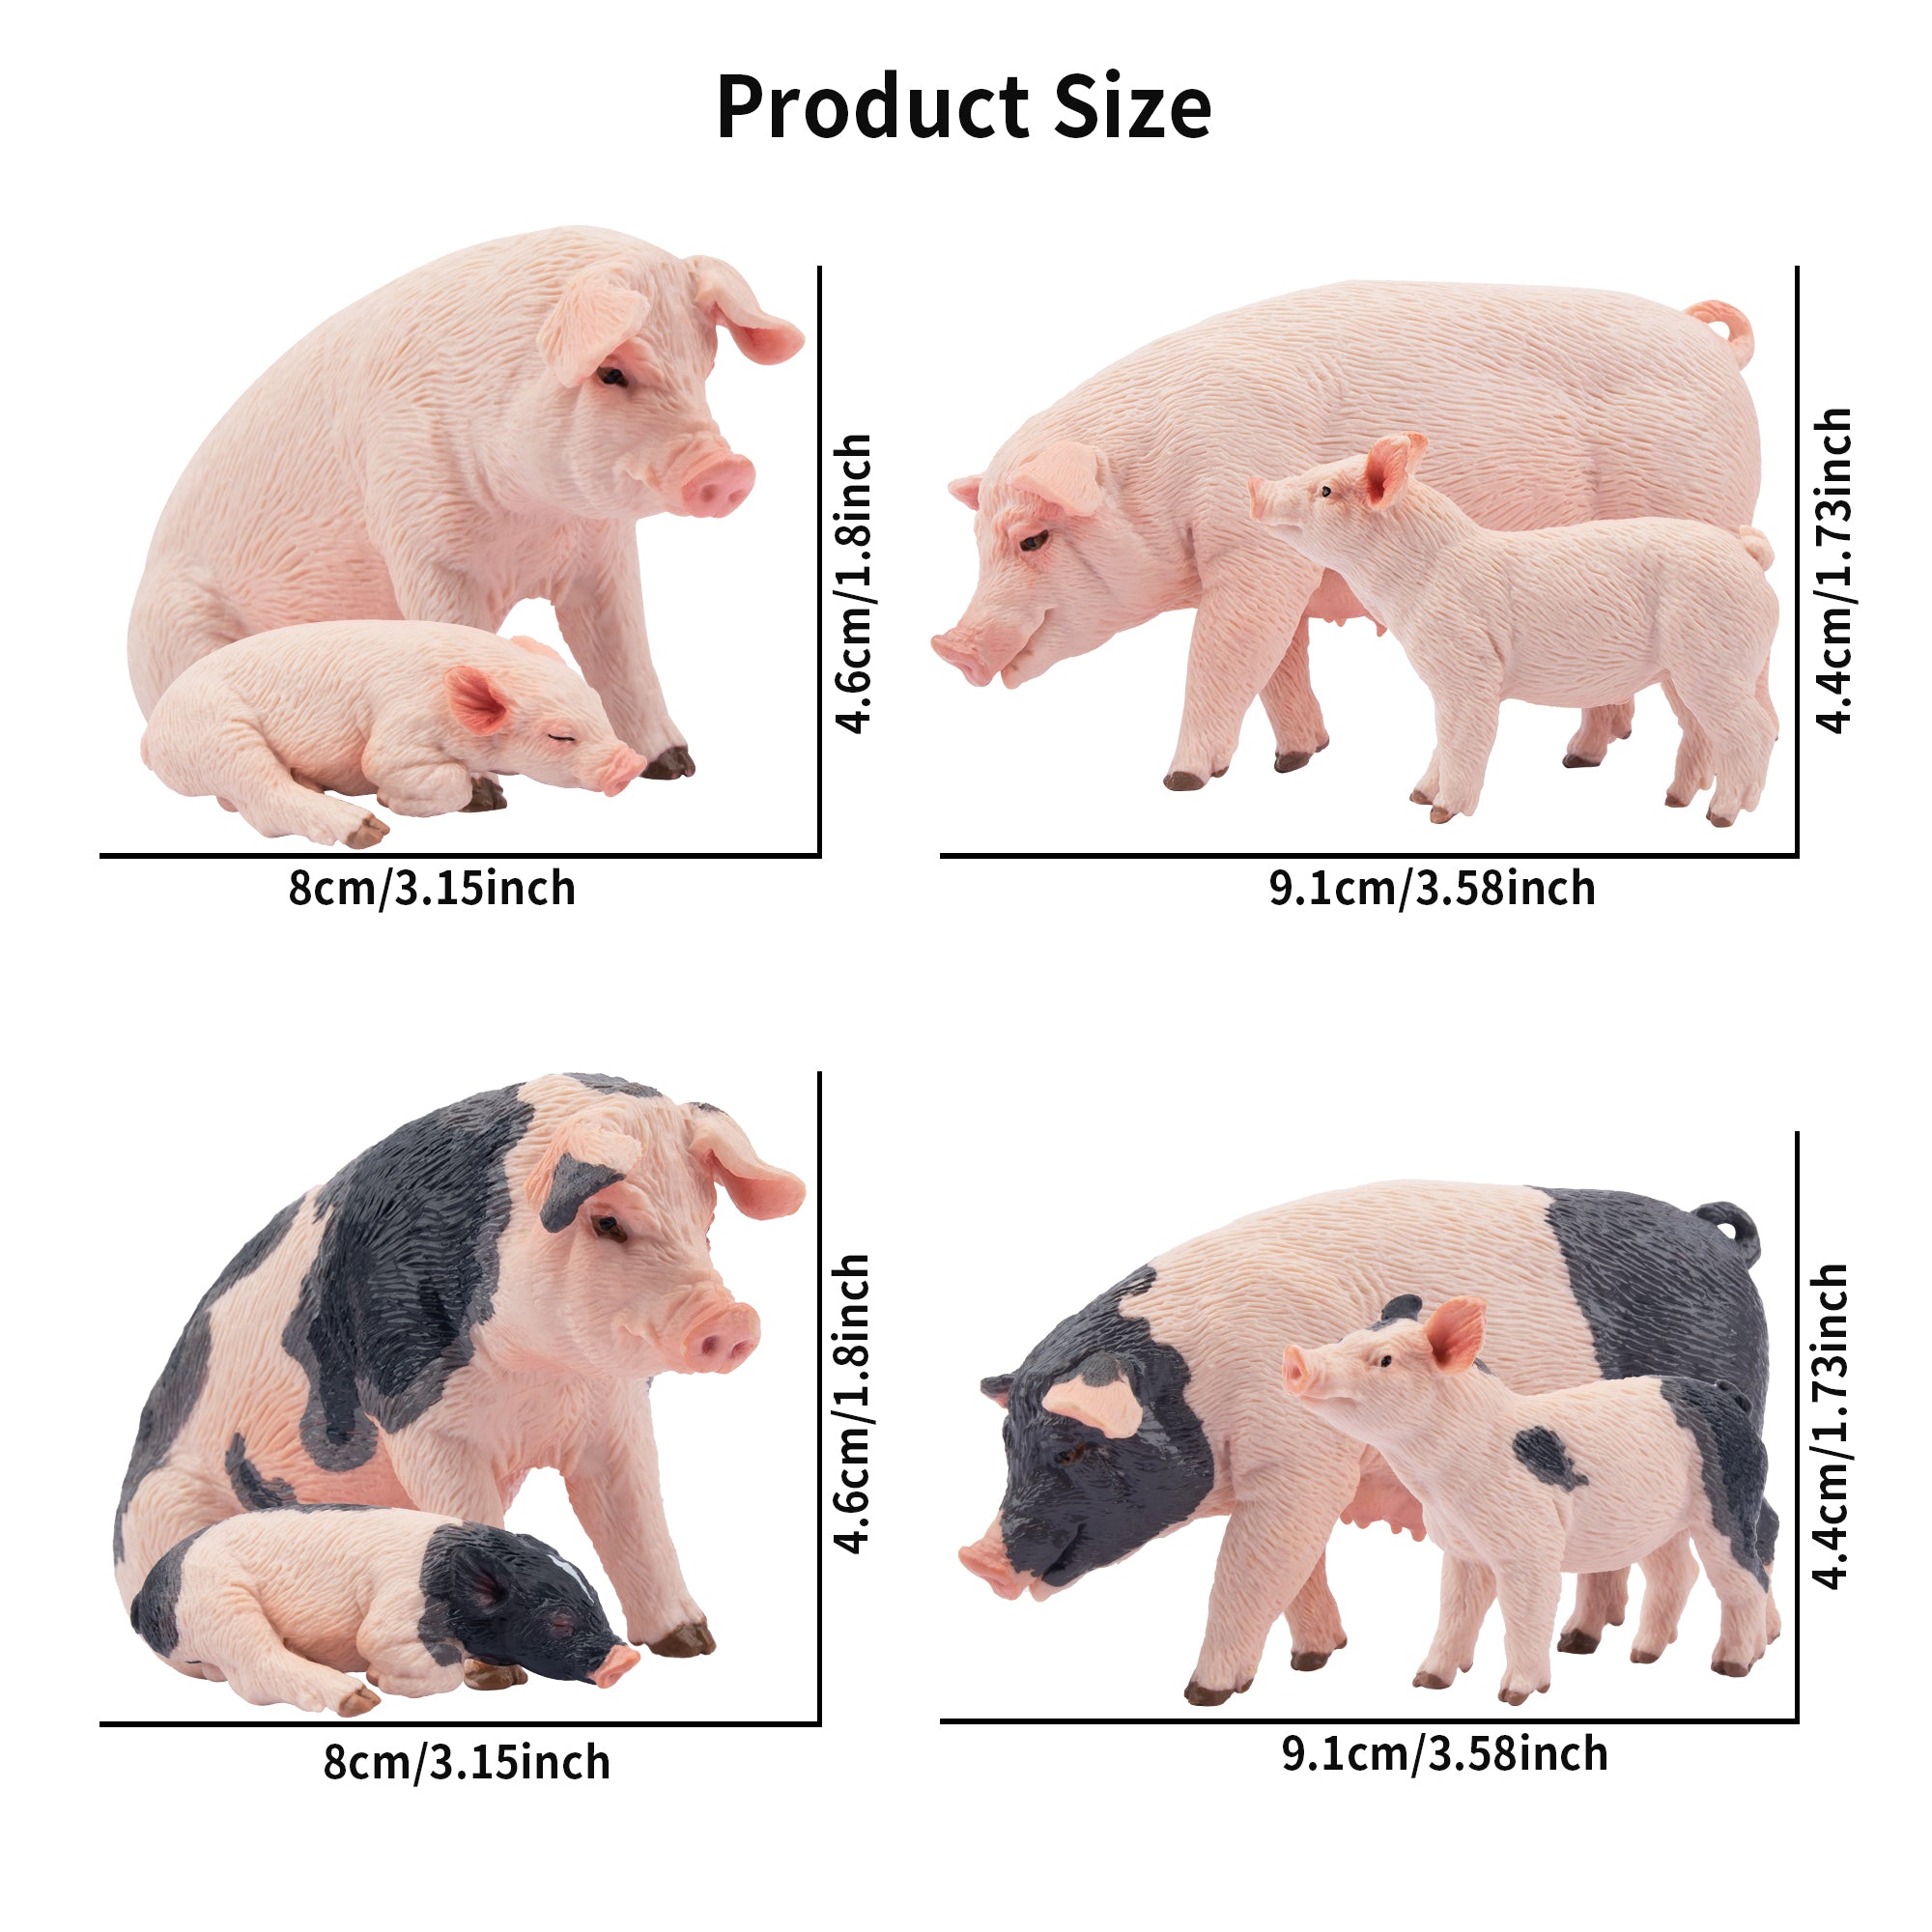 8-Piece Pig Family Figurines Playset with Adult & Baby Pigs-size